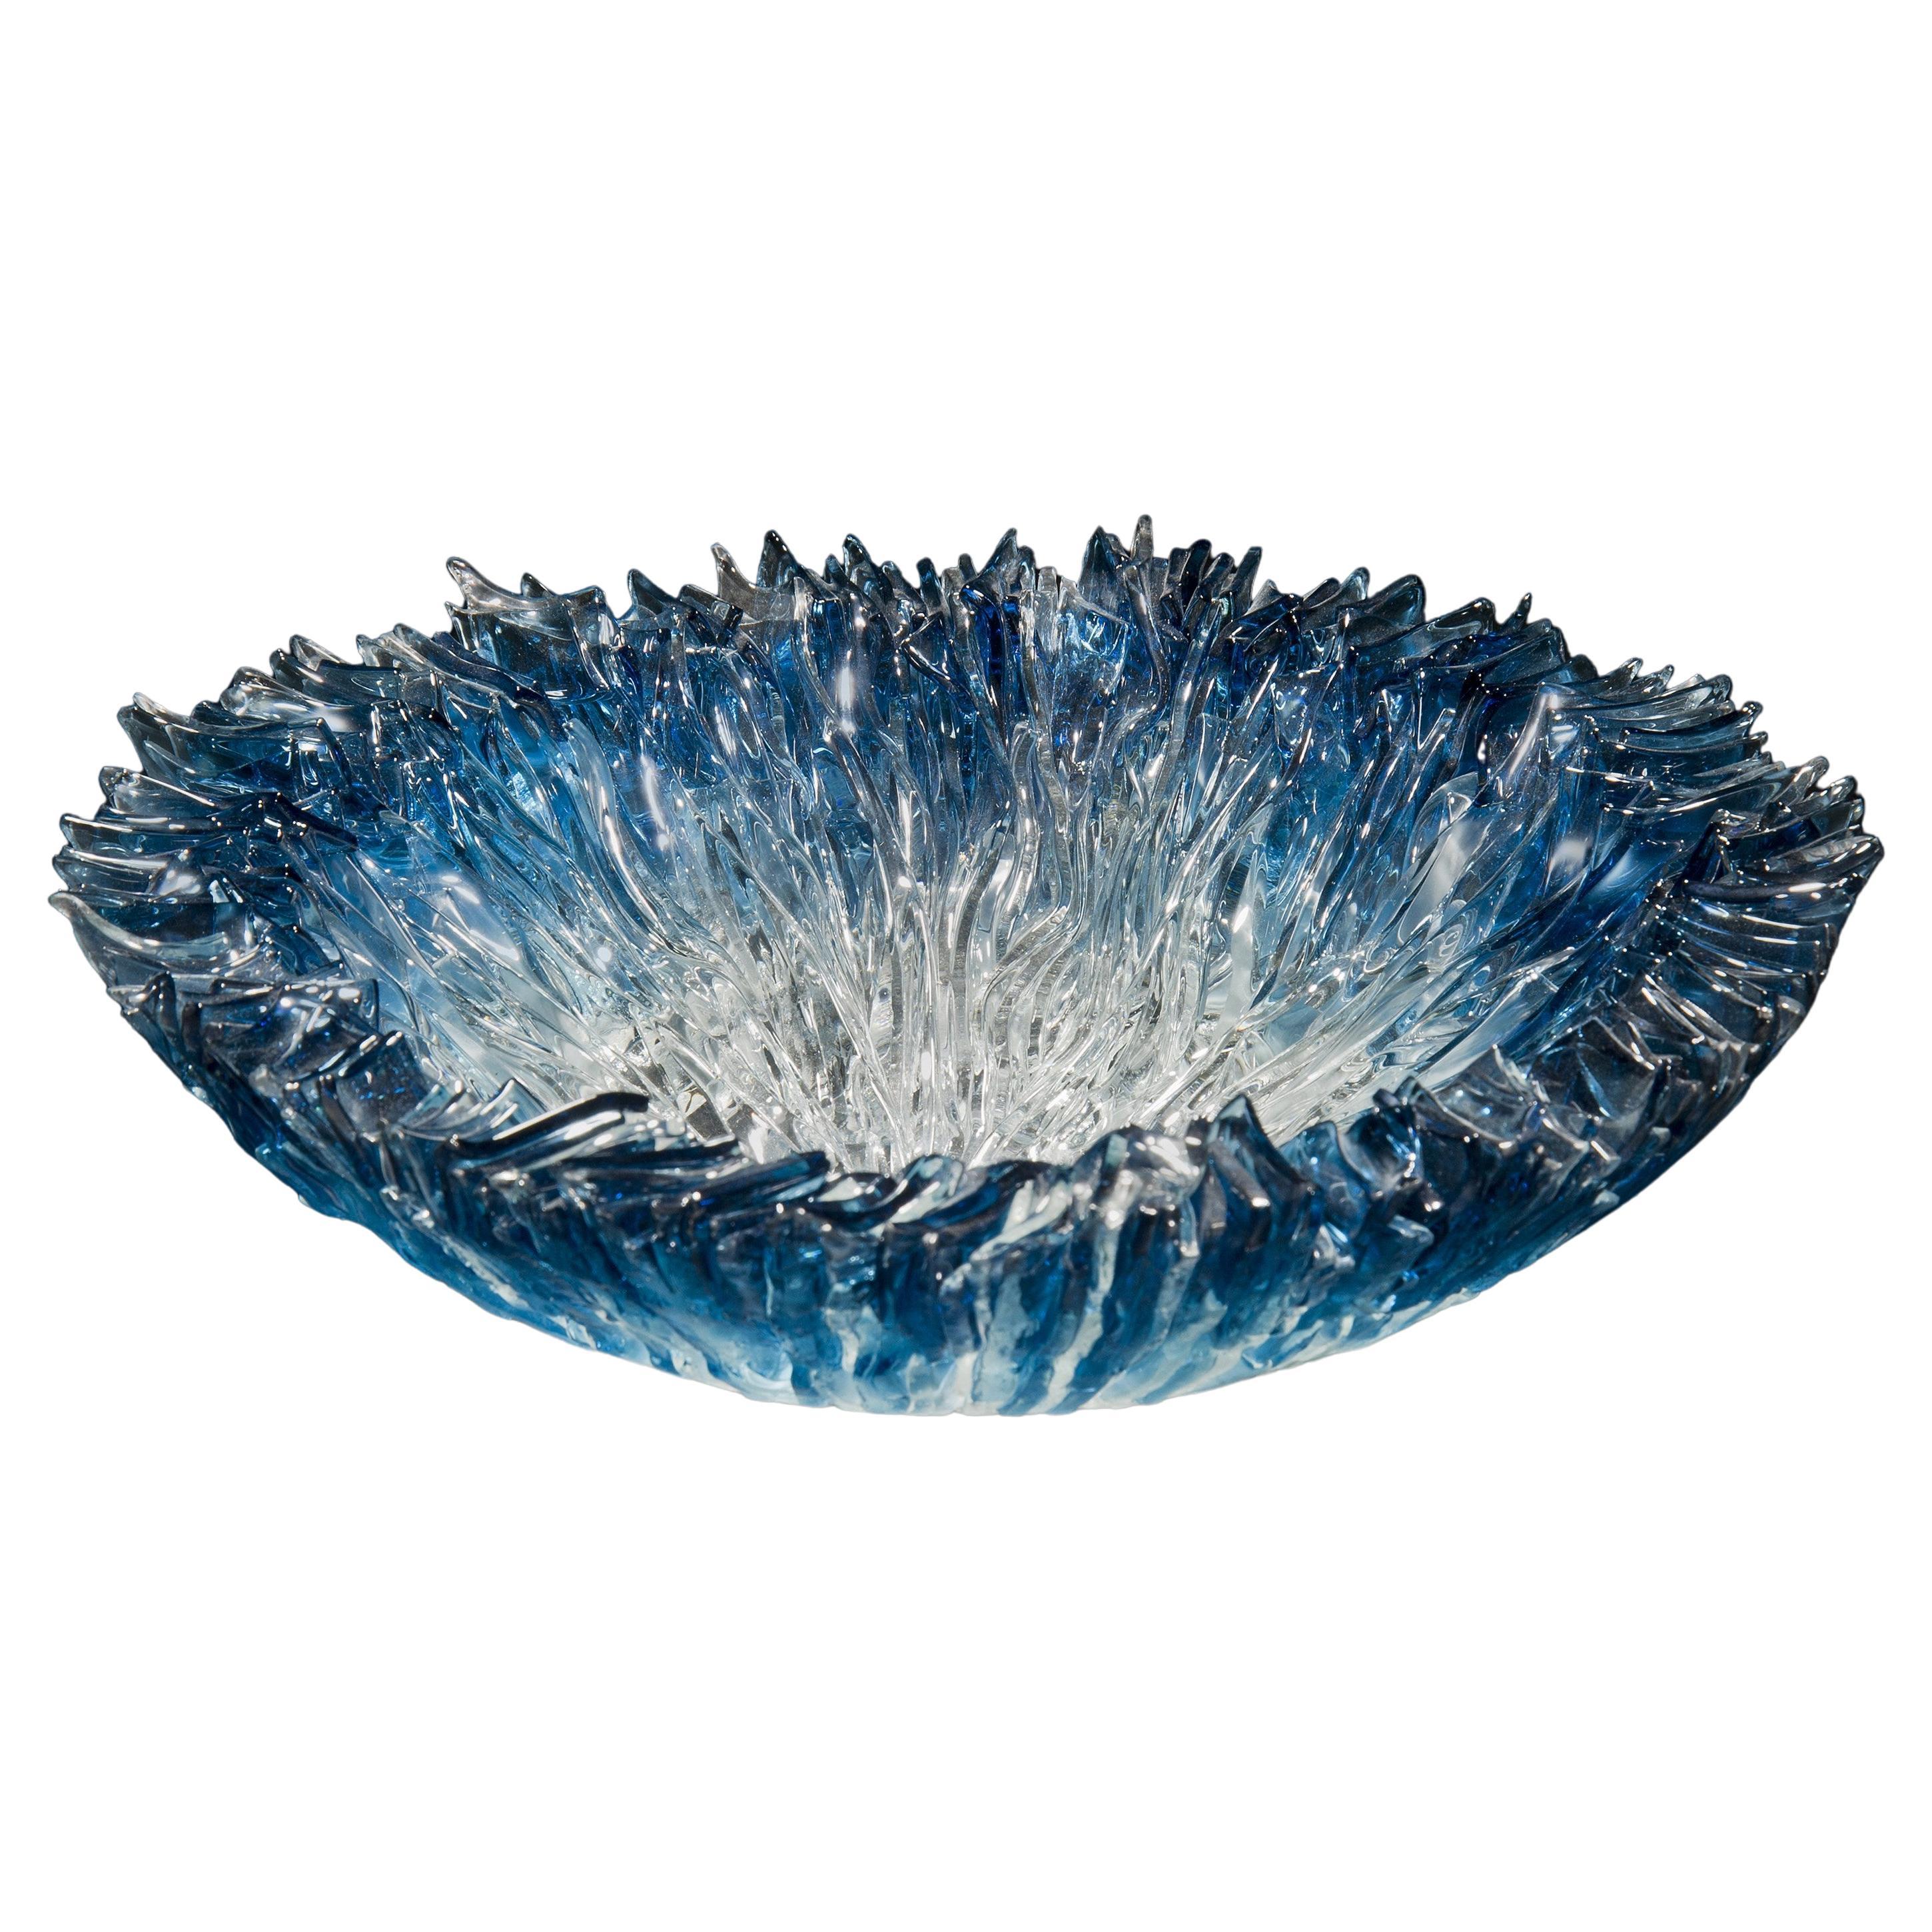 Bloom Bowl in Aqua, Glass Textured Sculptural Centrepiece by Wayne Charmer